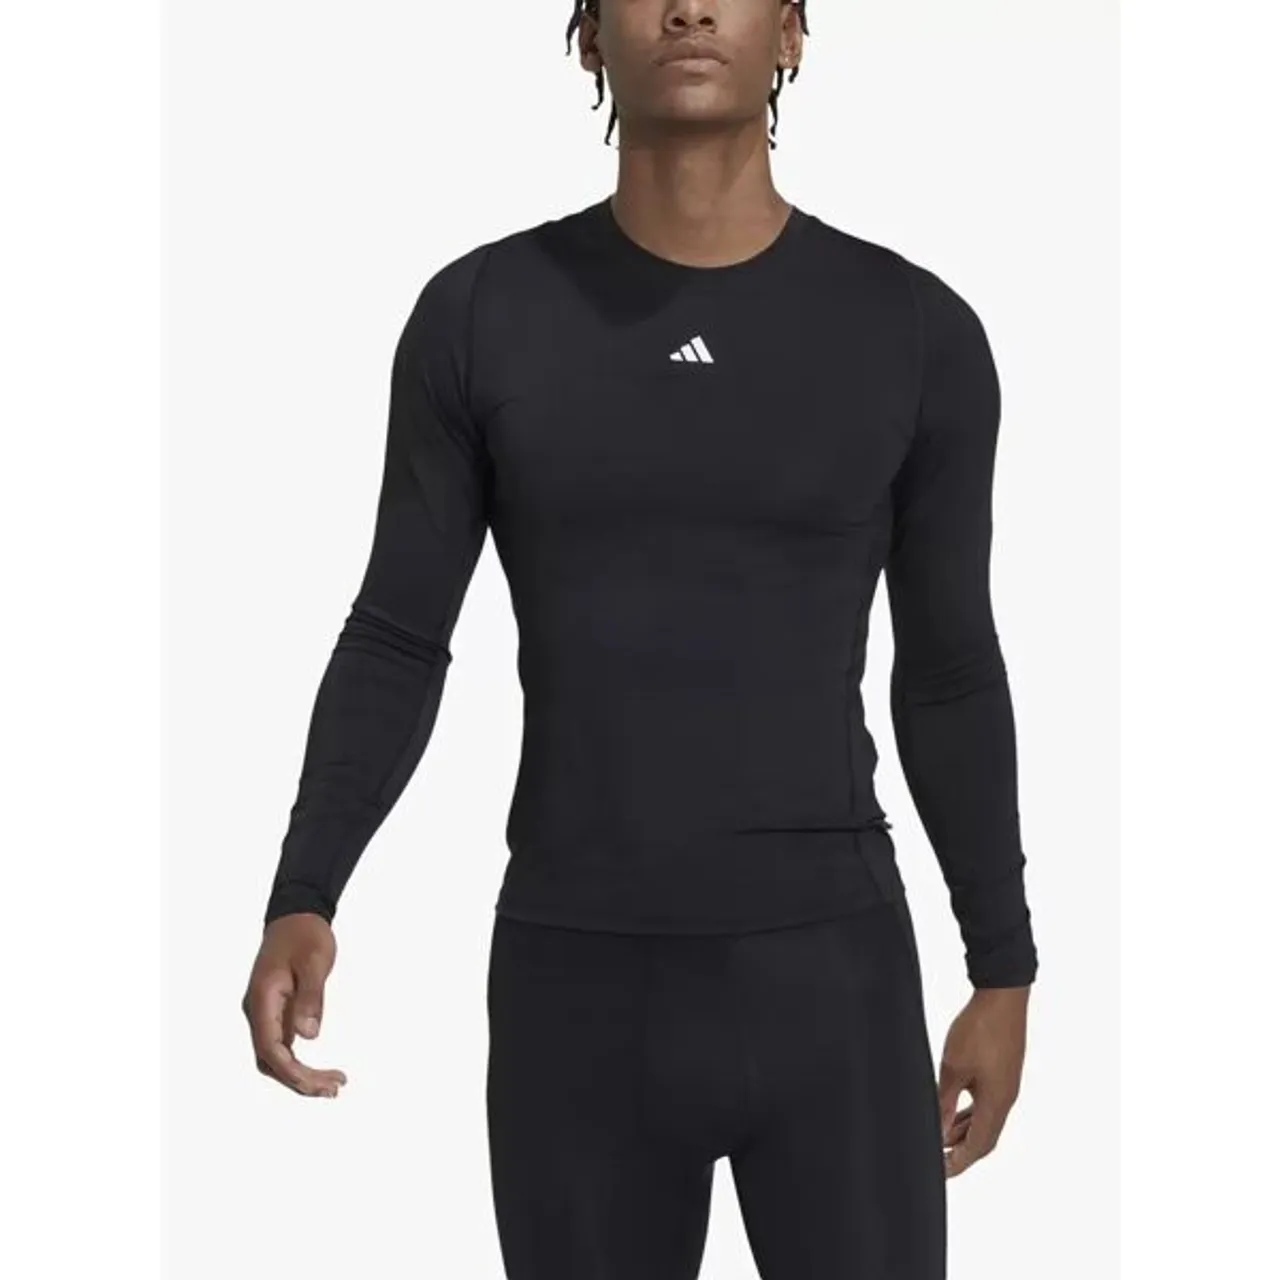 adidas Techfit Long Sleeve Compression Gym Top - Black - Male